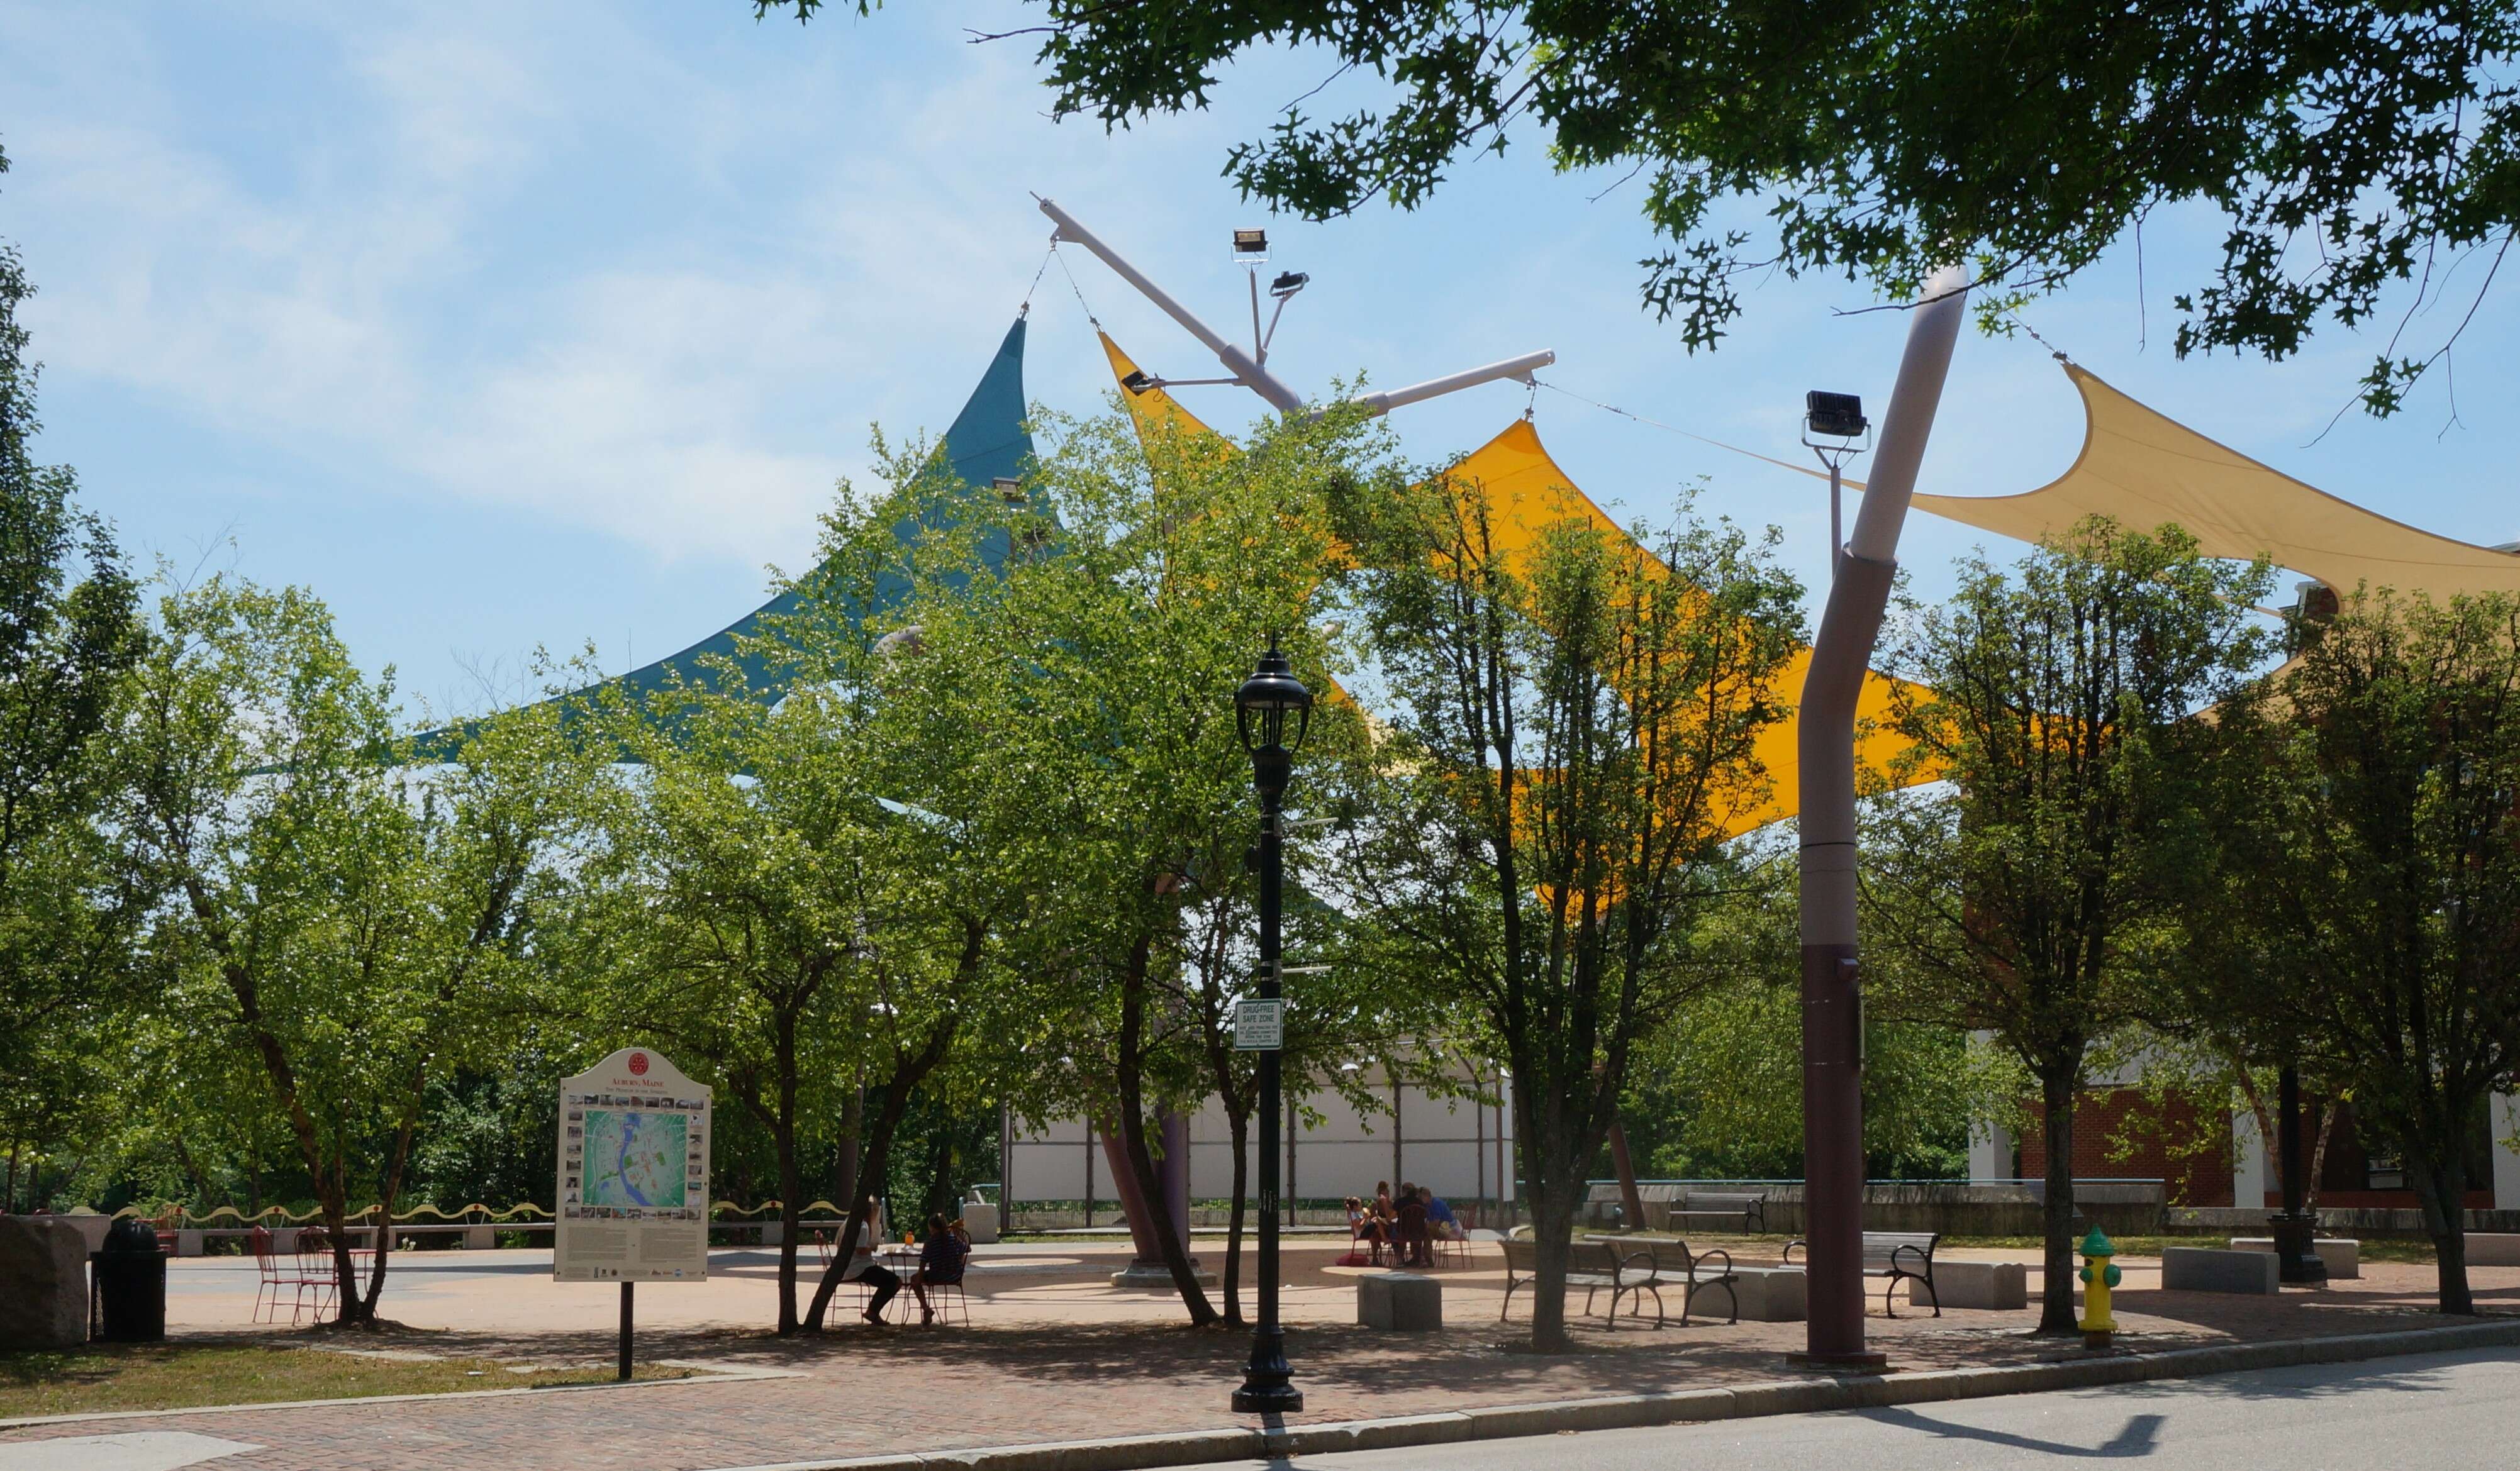 a brick plaza with bright colored canopies in the many trees and benches and picnic tables